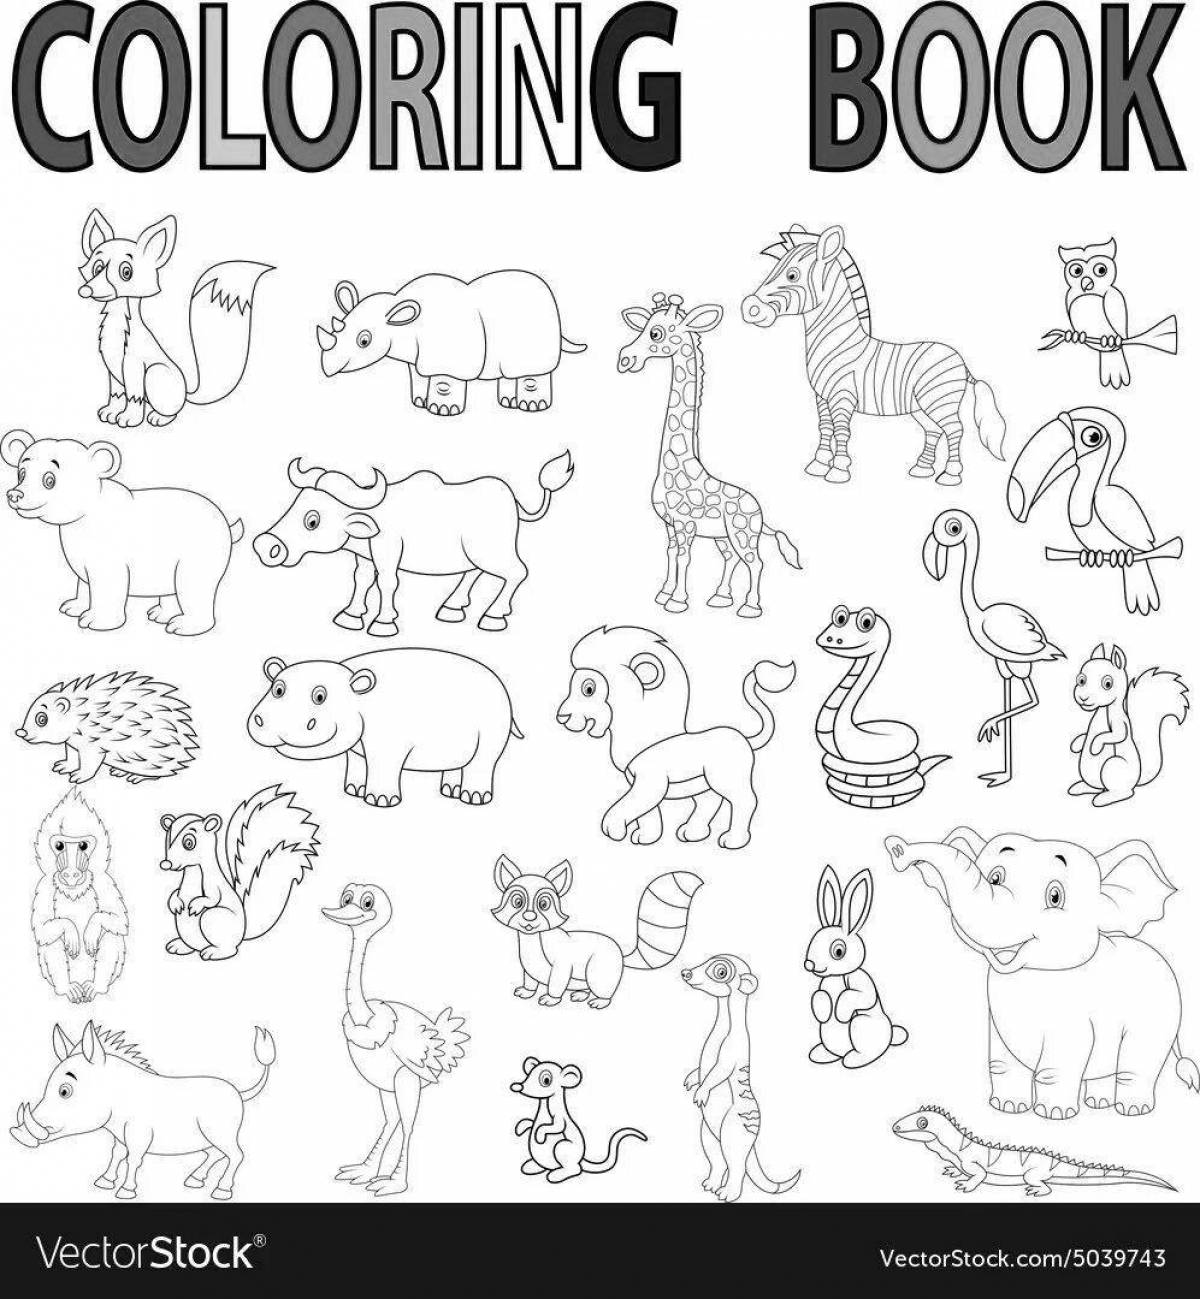 Great english animal coloring book for schoolchildren